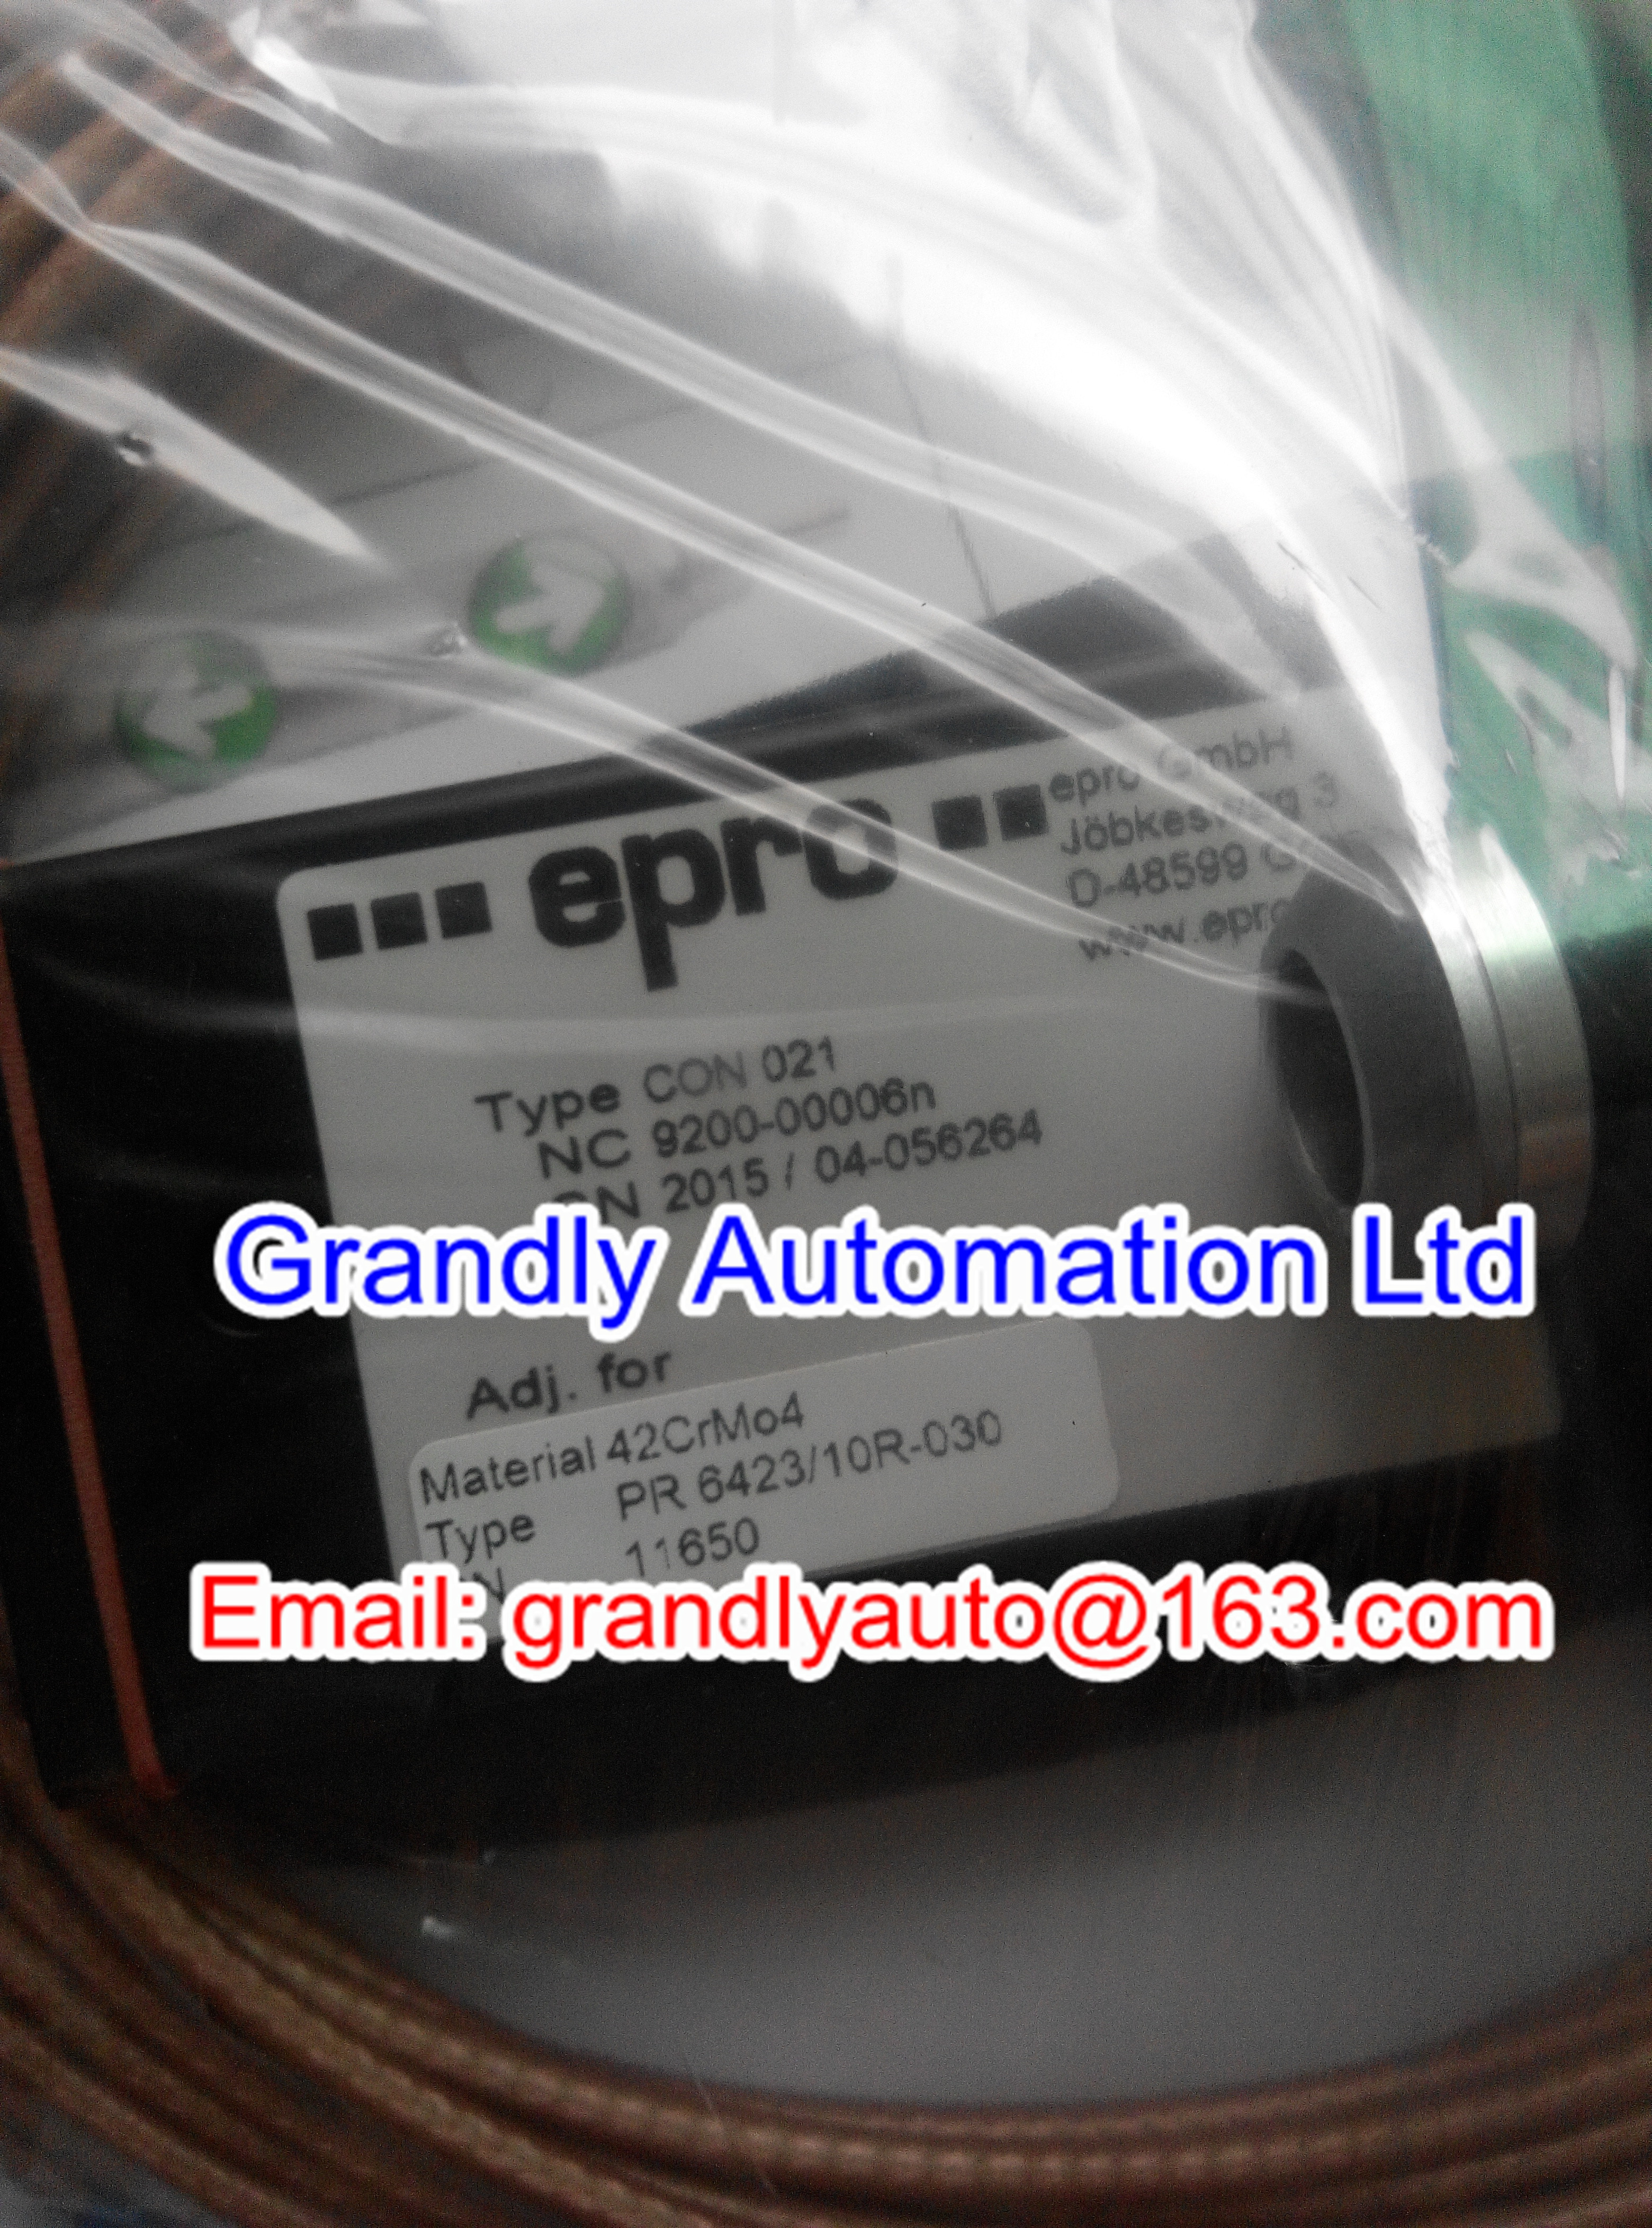 Quality EPRO UES 815S in stock -Buy at Grandly Automation Ltd